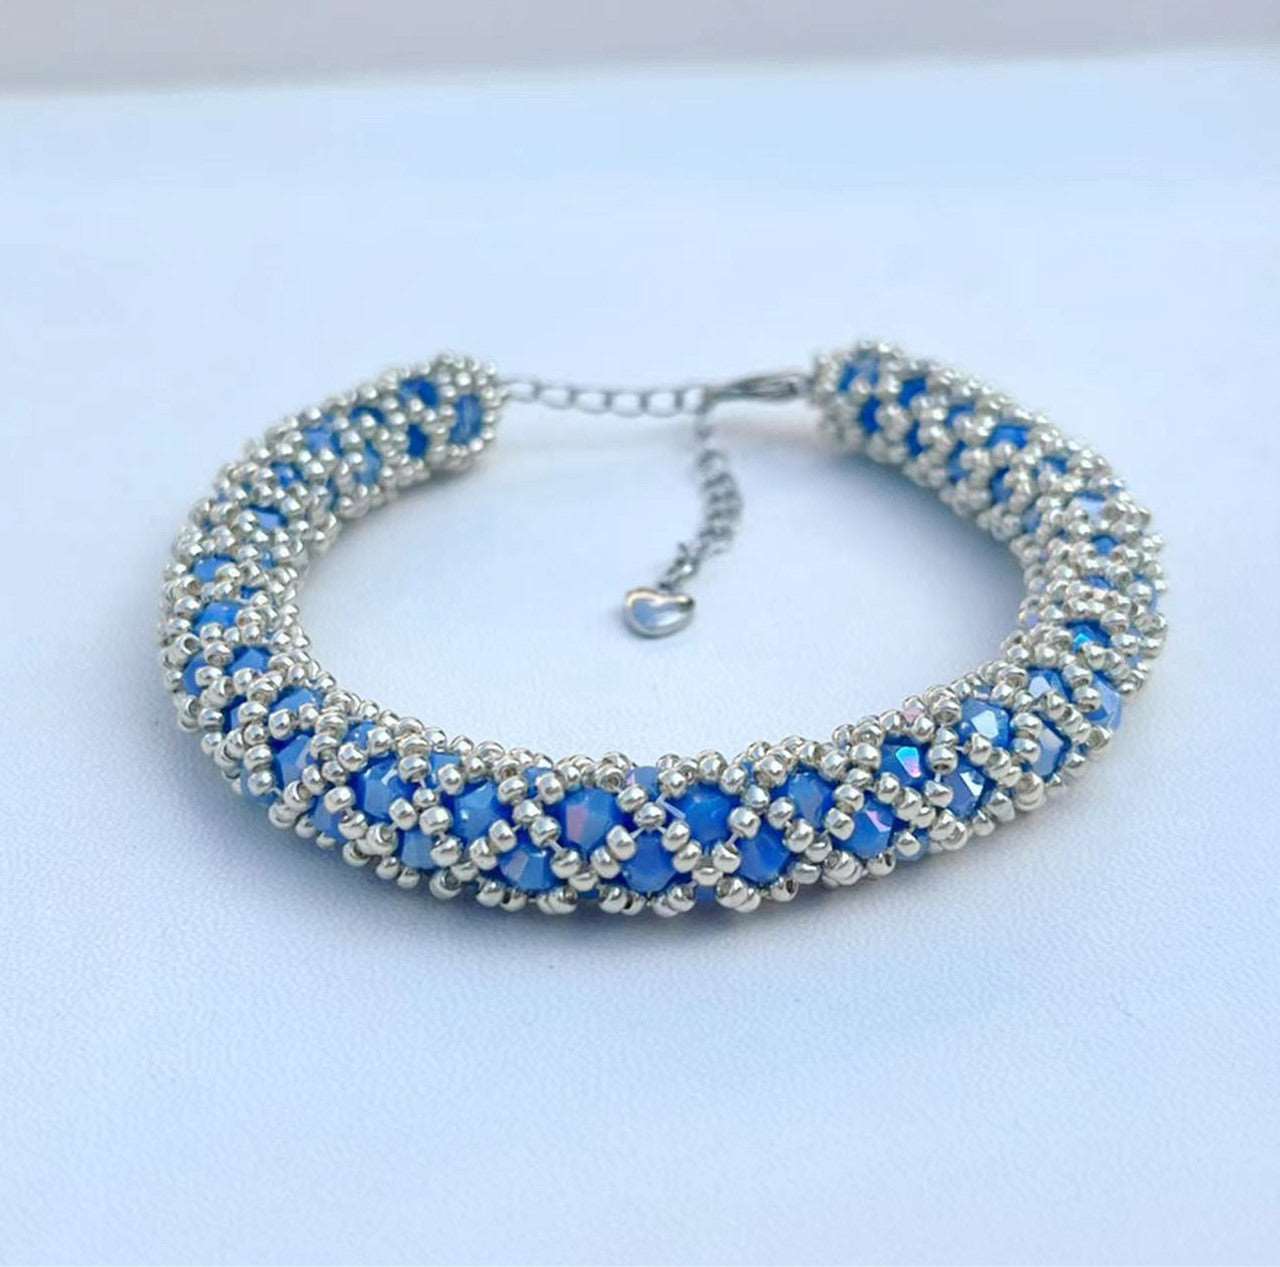 Exquisite Artisan Glass Bead Bracelet with Silver Accents